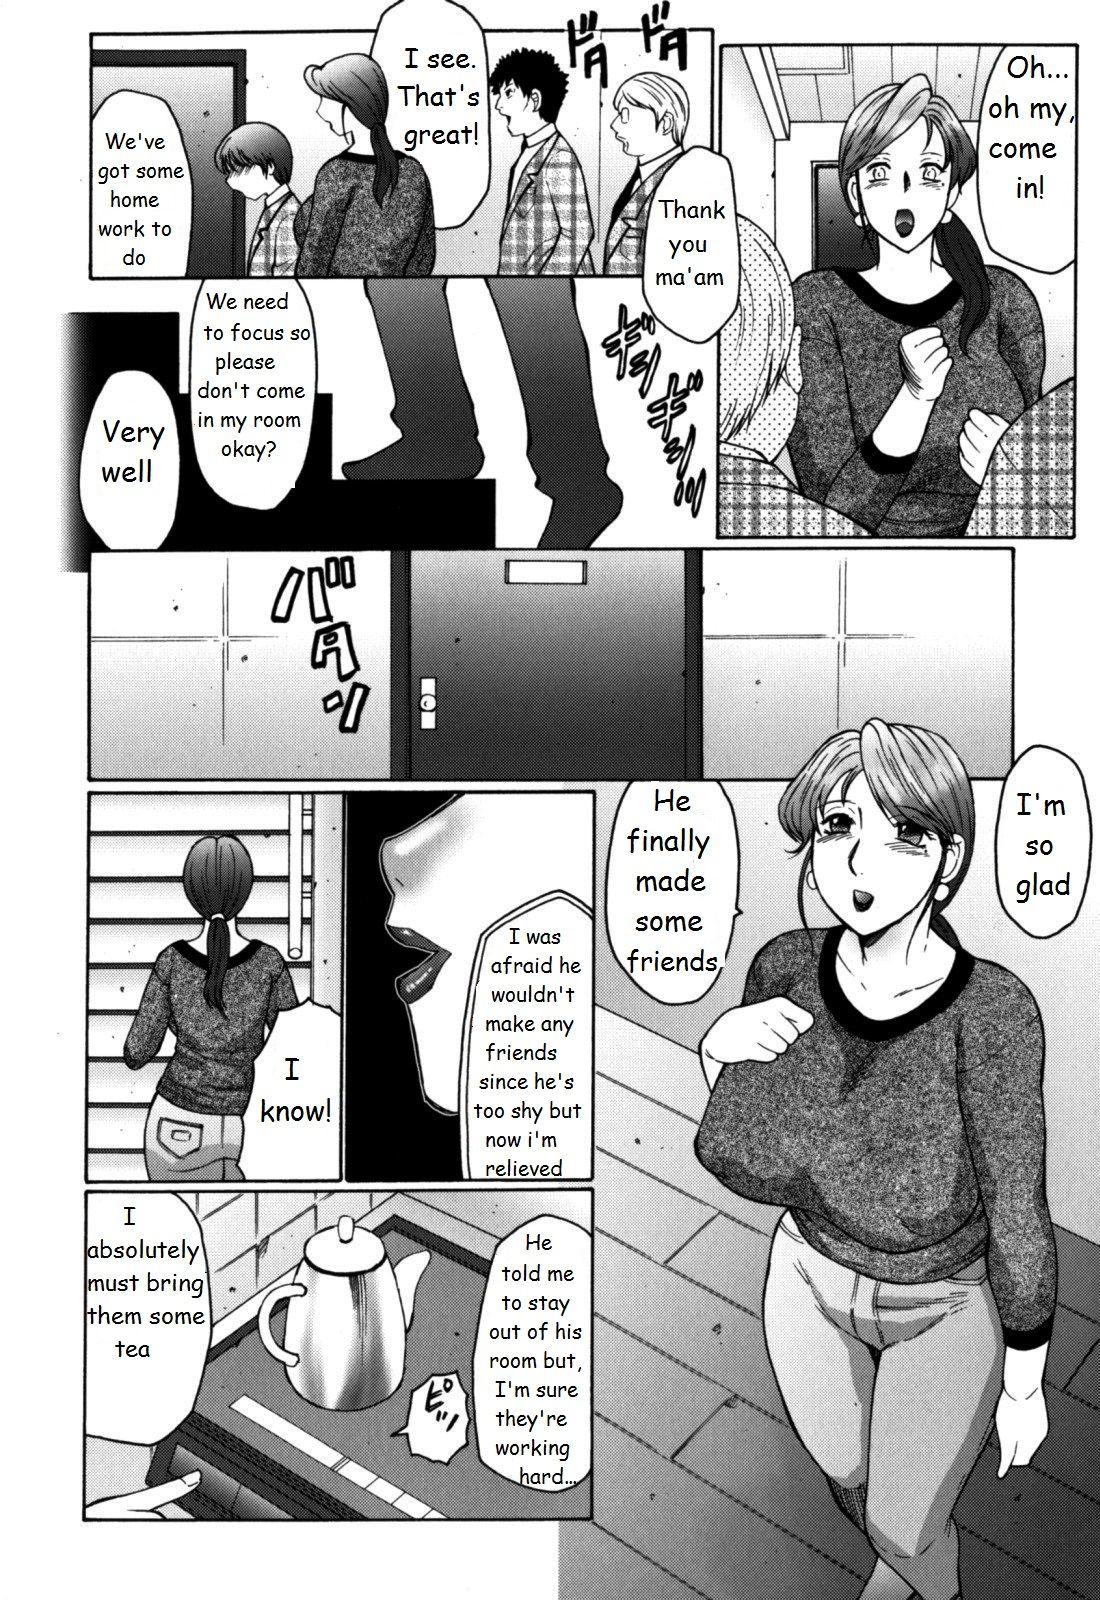 Eating Pussy FUUSEN CLUB HAHA MAMIRE CH. 1-5 ENGLISH.zip Strapon - Page 5